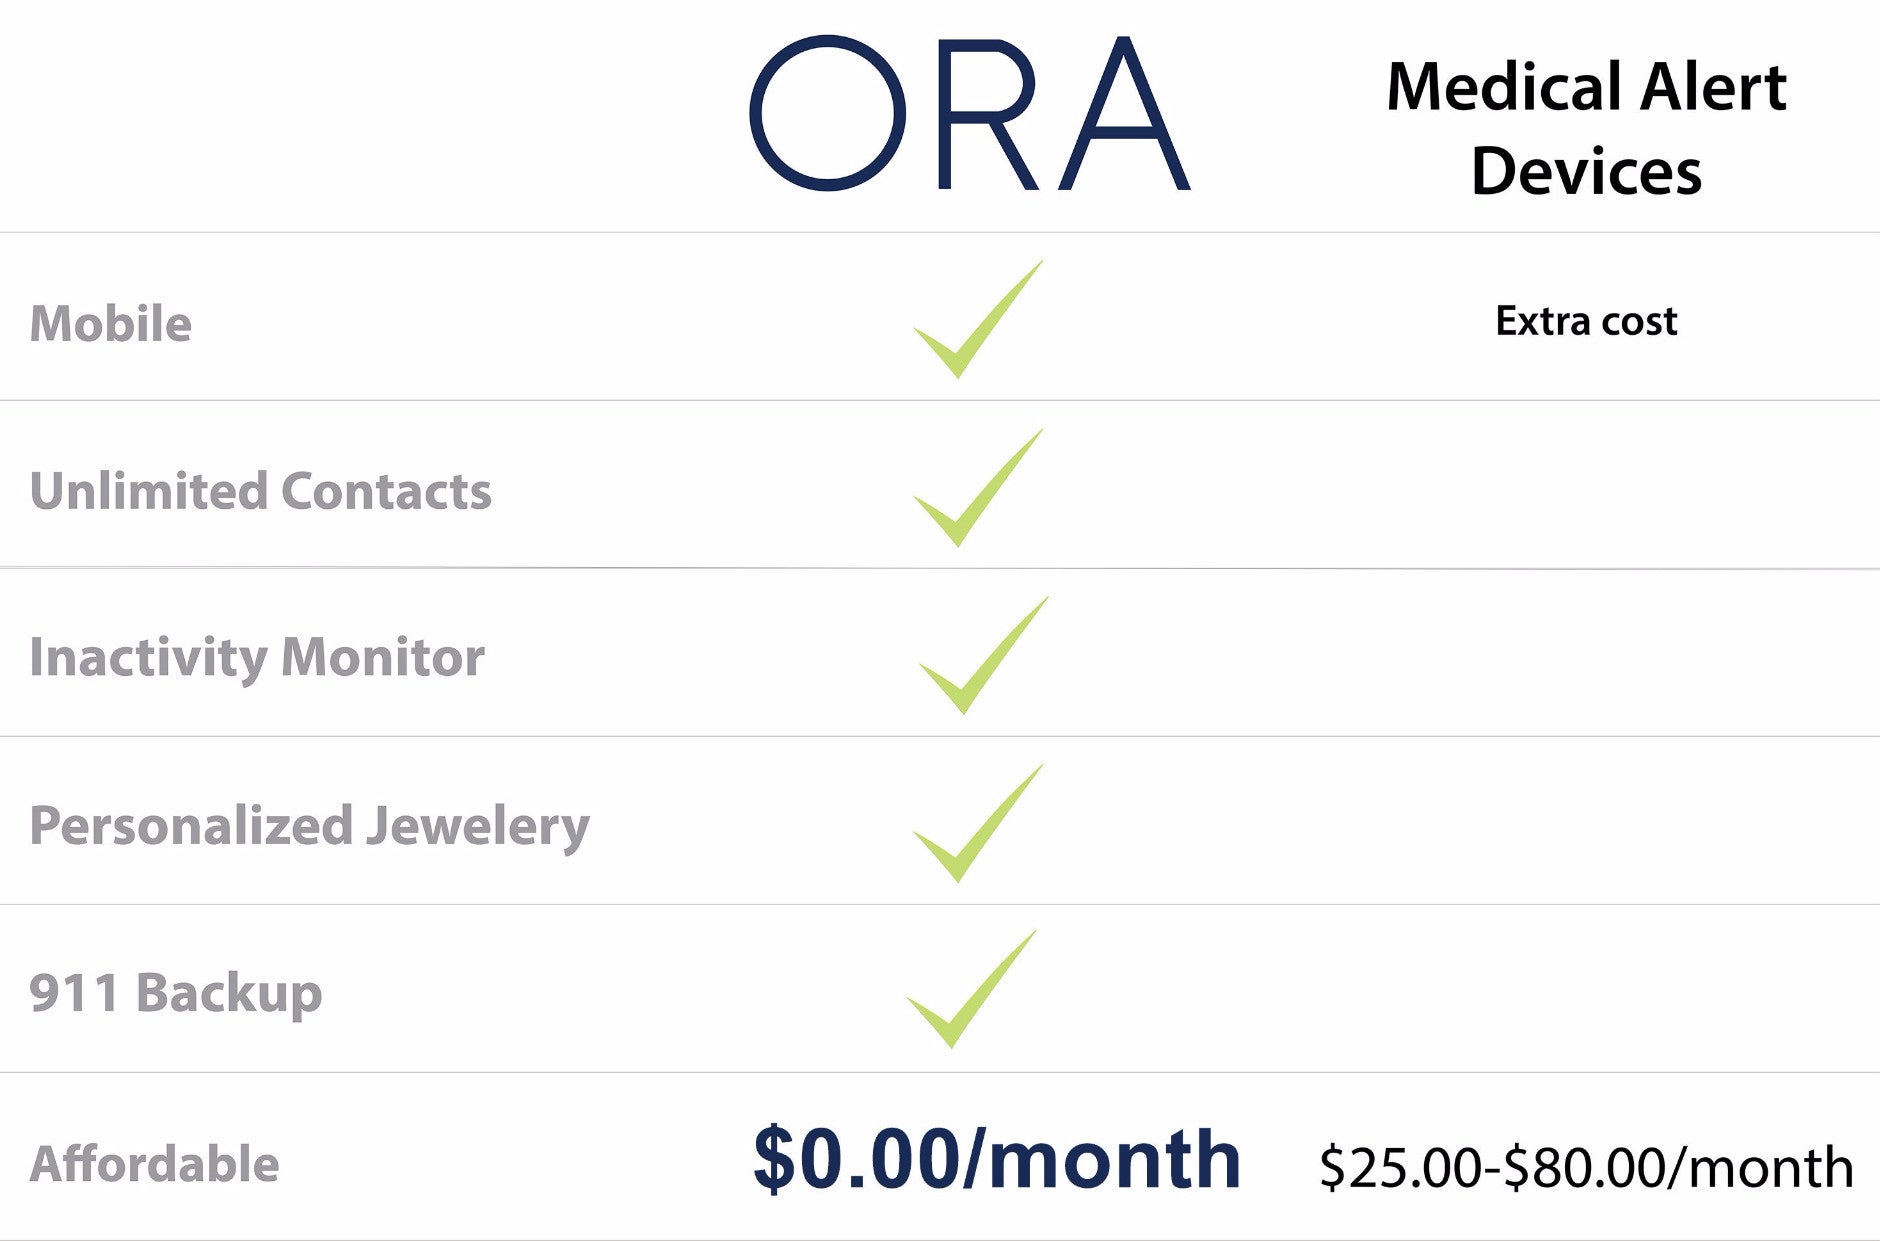 Compare ORA to other medical alert devices. ORA works anywhere, allows unlimited contacts, and can call 911